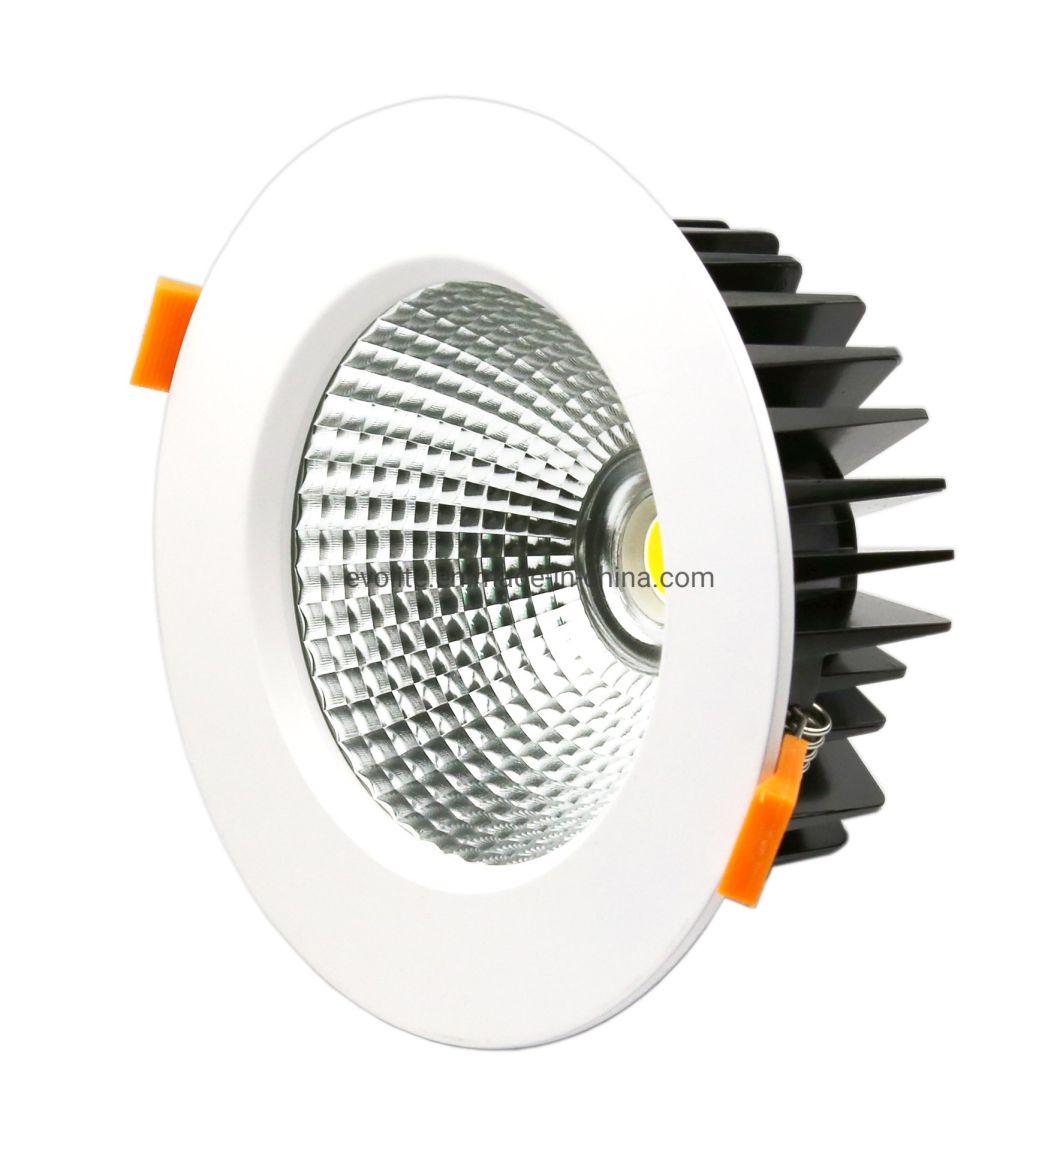 Narrow Beam Angle 10 Degree COB LED Downlight 6 Inch 175mm Cut out SAA CE RoHS Citizen COB